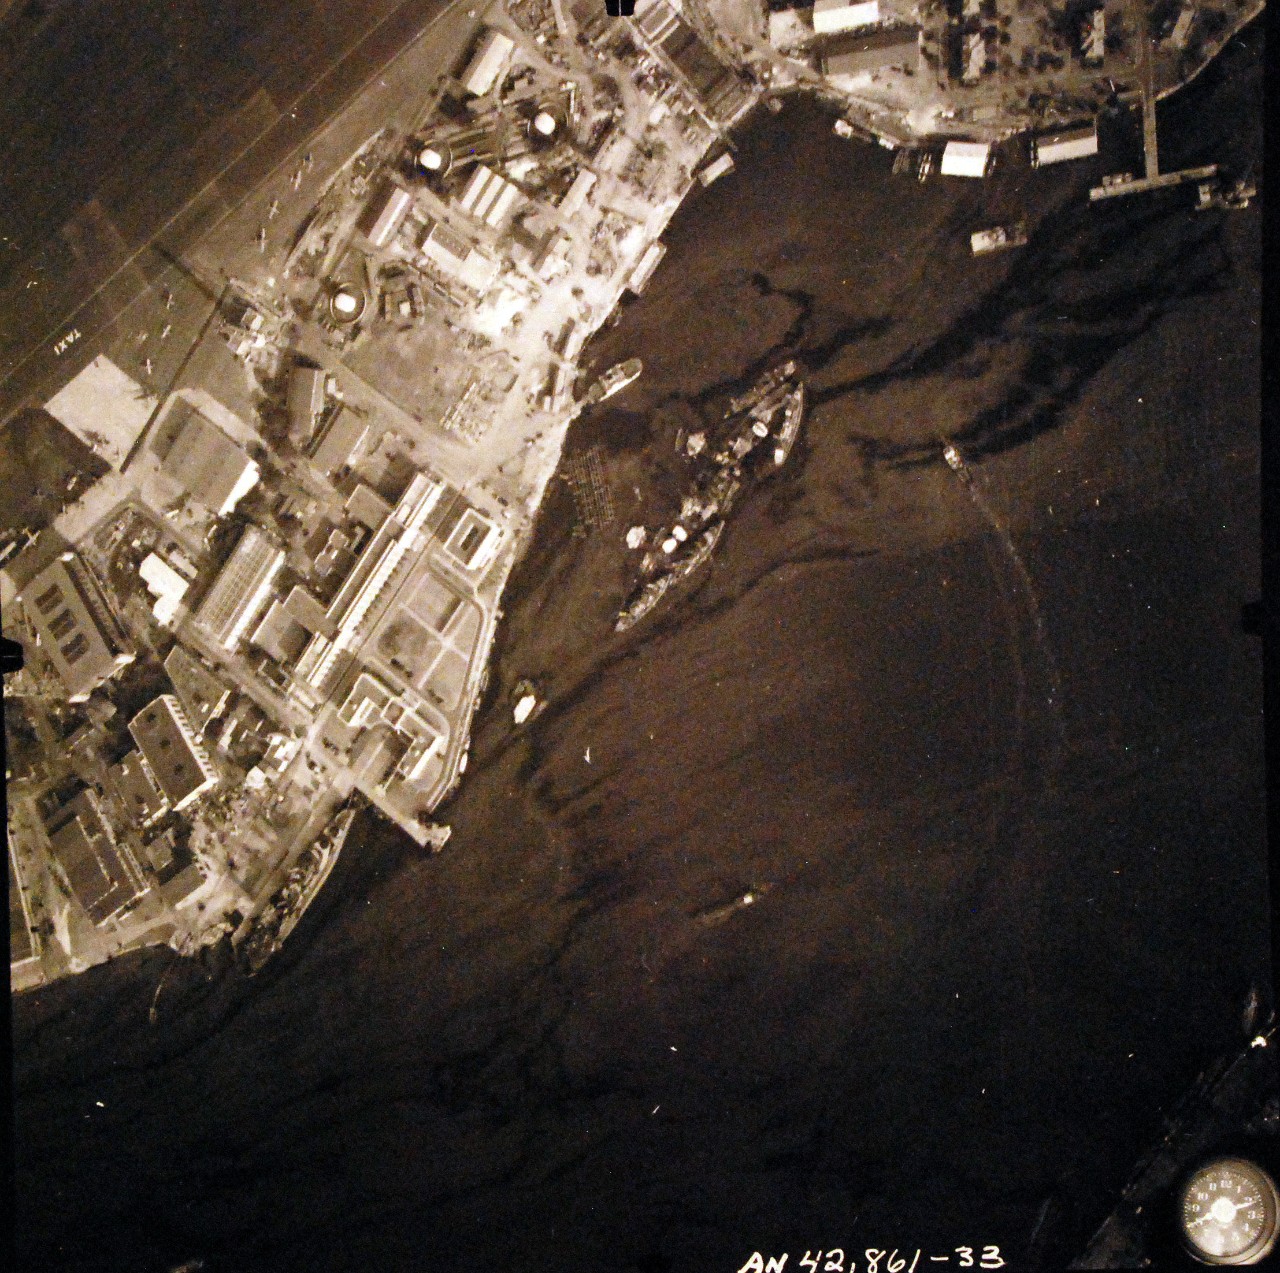 80-G-387593:  Pearl Harbor Attack, 7 December 1941.  Aerial view of "Battleship Row" moorings on the southern side of Ford Island, 10 December 1941, showing damage from the Japanese raid three days earlier.  USS California (BB 44) is shown.  Note dark oil streaks on the harbor surface, originating from the sunken battleships.  Photographed by VJ-1 at an altitude of 3,000 feet and released November 9, 1950. U.S. Navy photograph, now in the collections of the National Archives.       (9/22/2015).